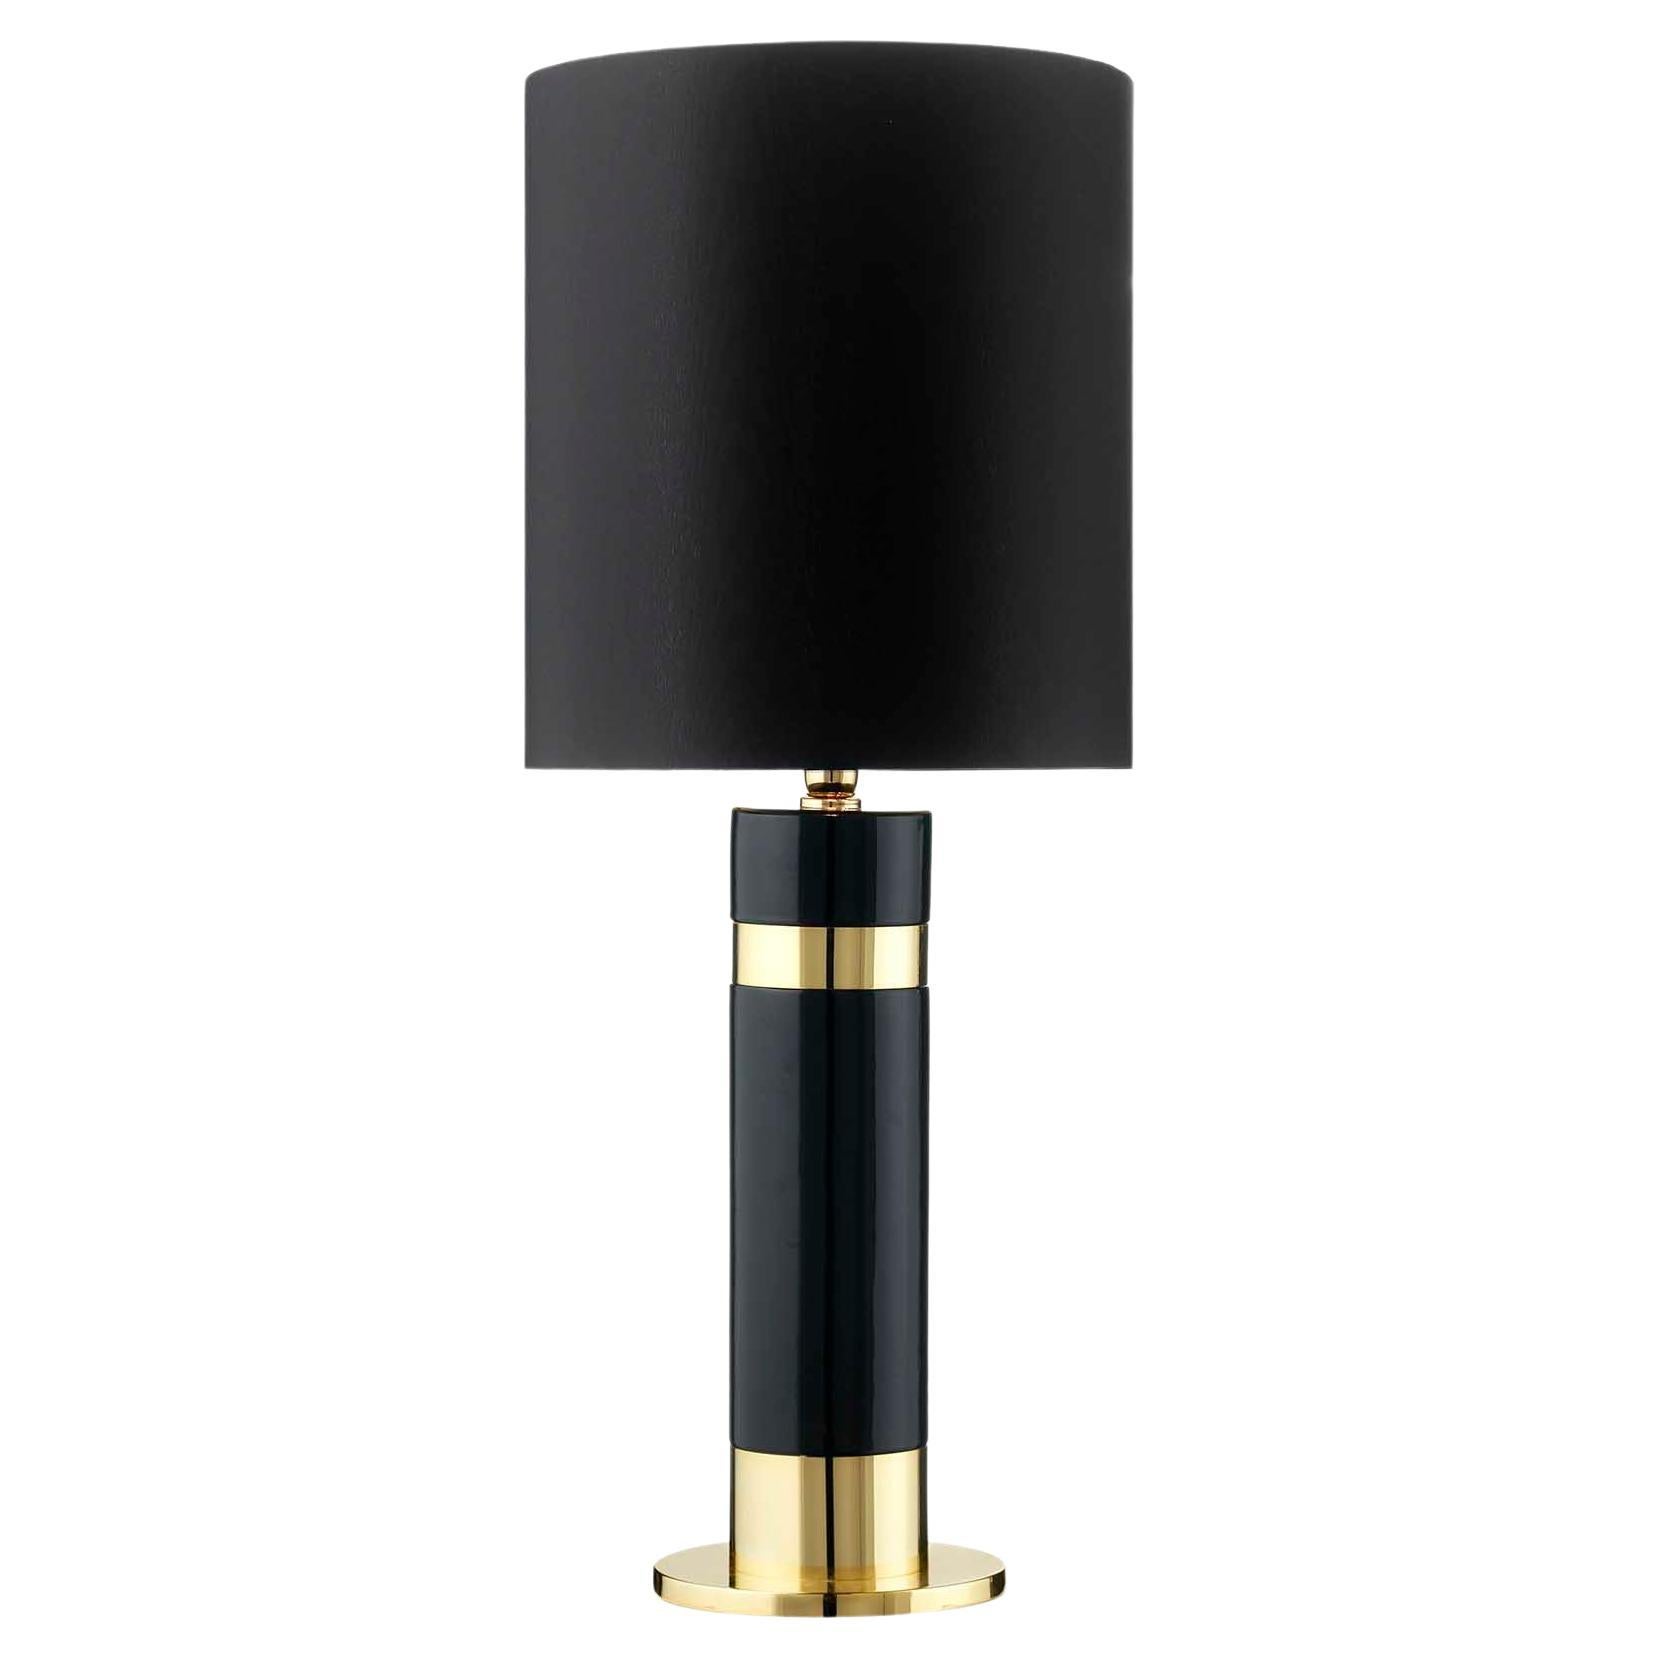 Ceramic table lamp HERMES 2 black glazed and 24 carat gold finished 
with cotton lampshade
cod. LHE002


Measures: height 115.0 cm., diameter 40.0 cm.
 